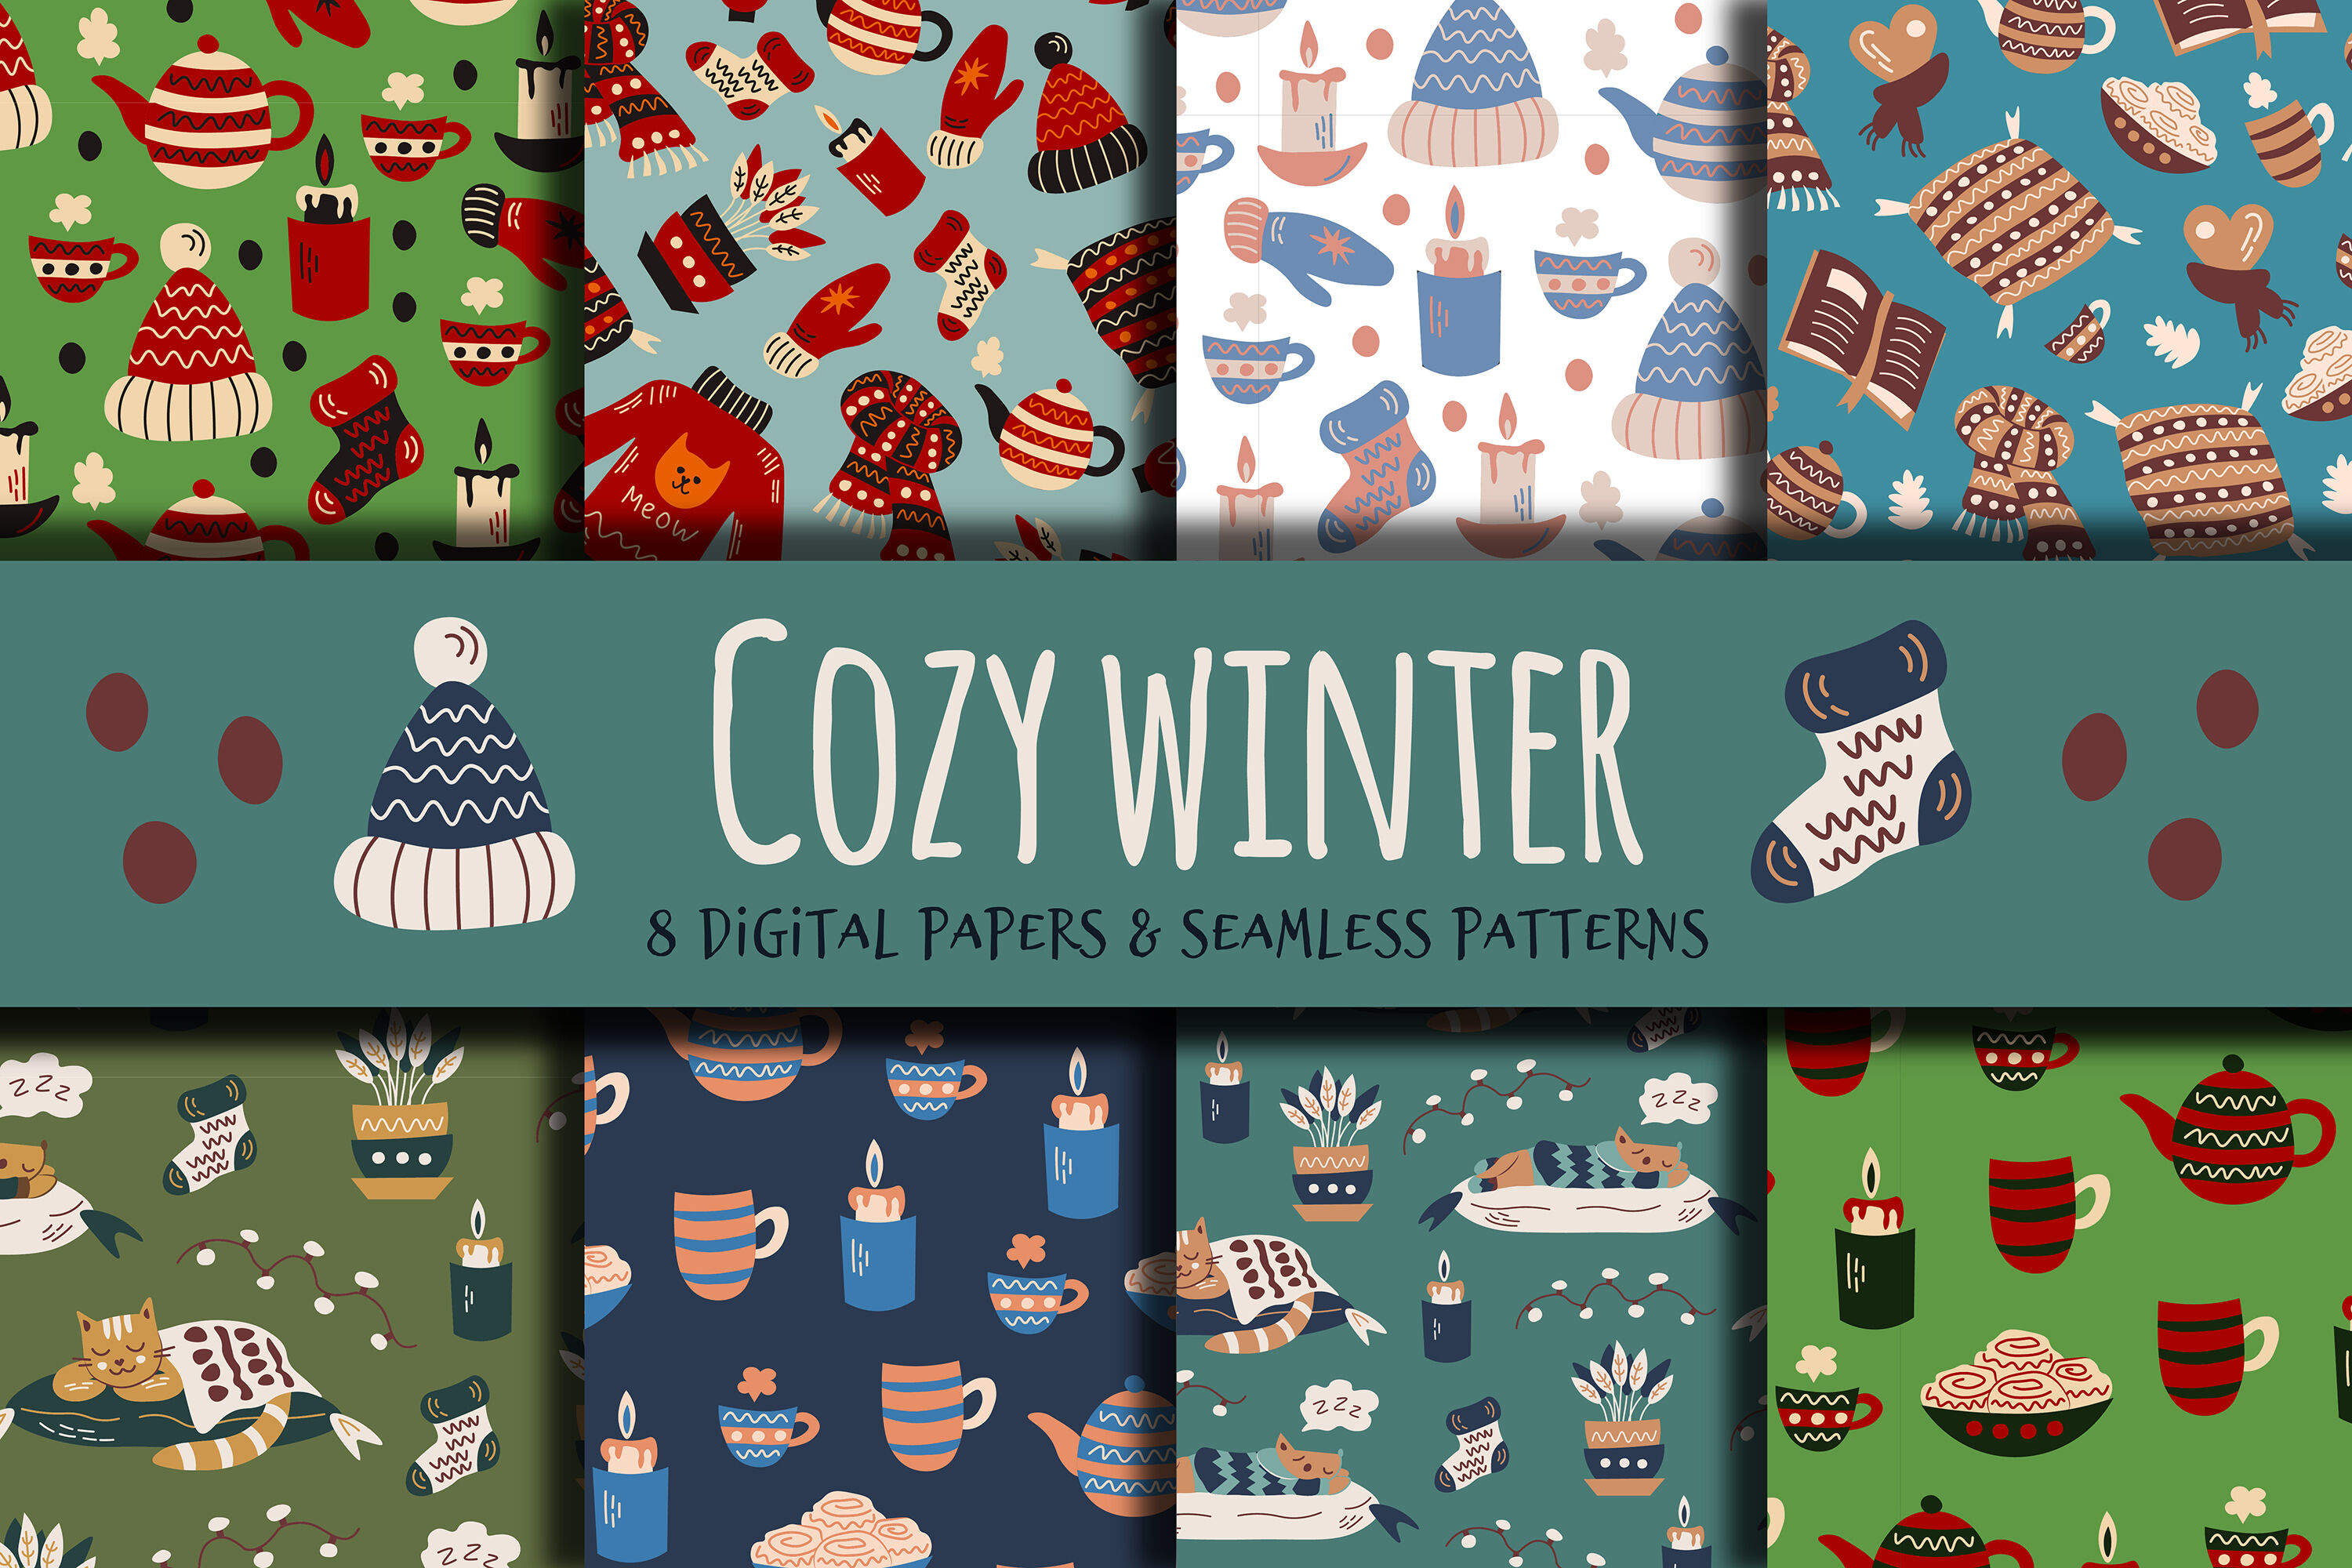 Cozy Winter seamless patterns & digital papers By Rin Green